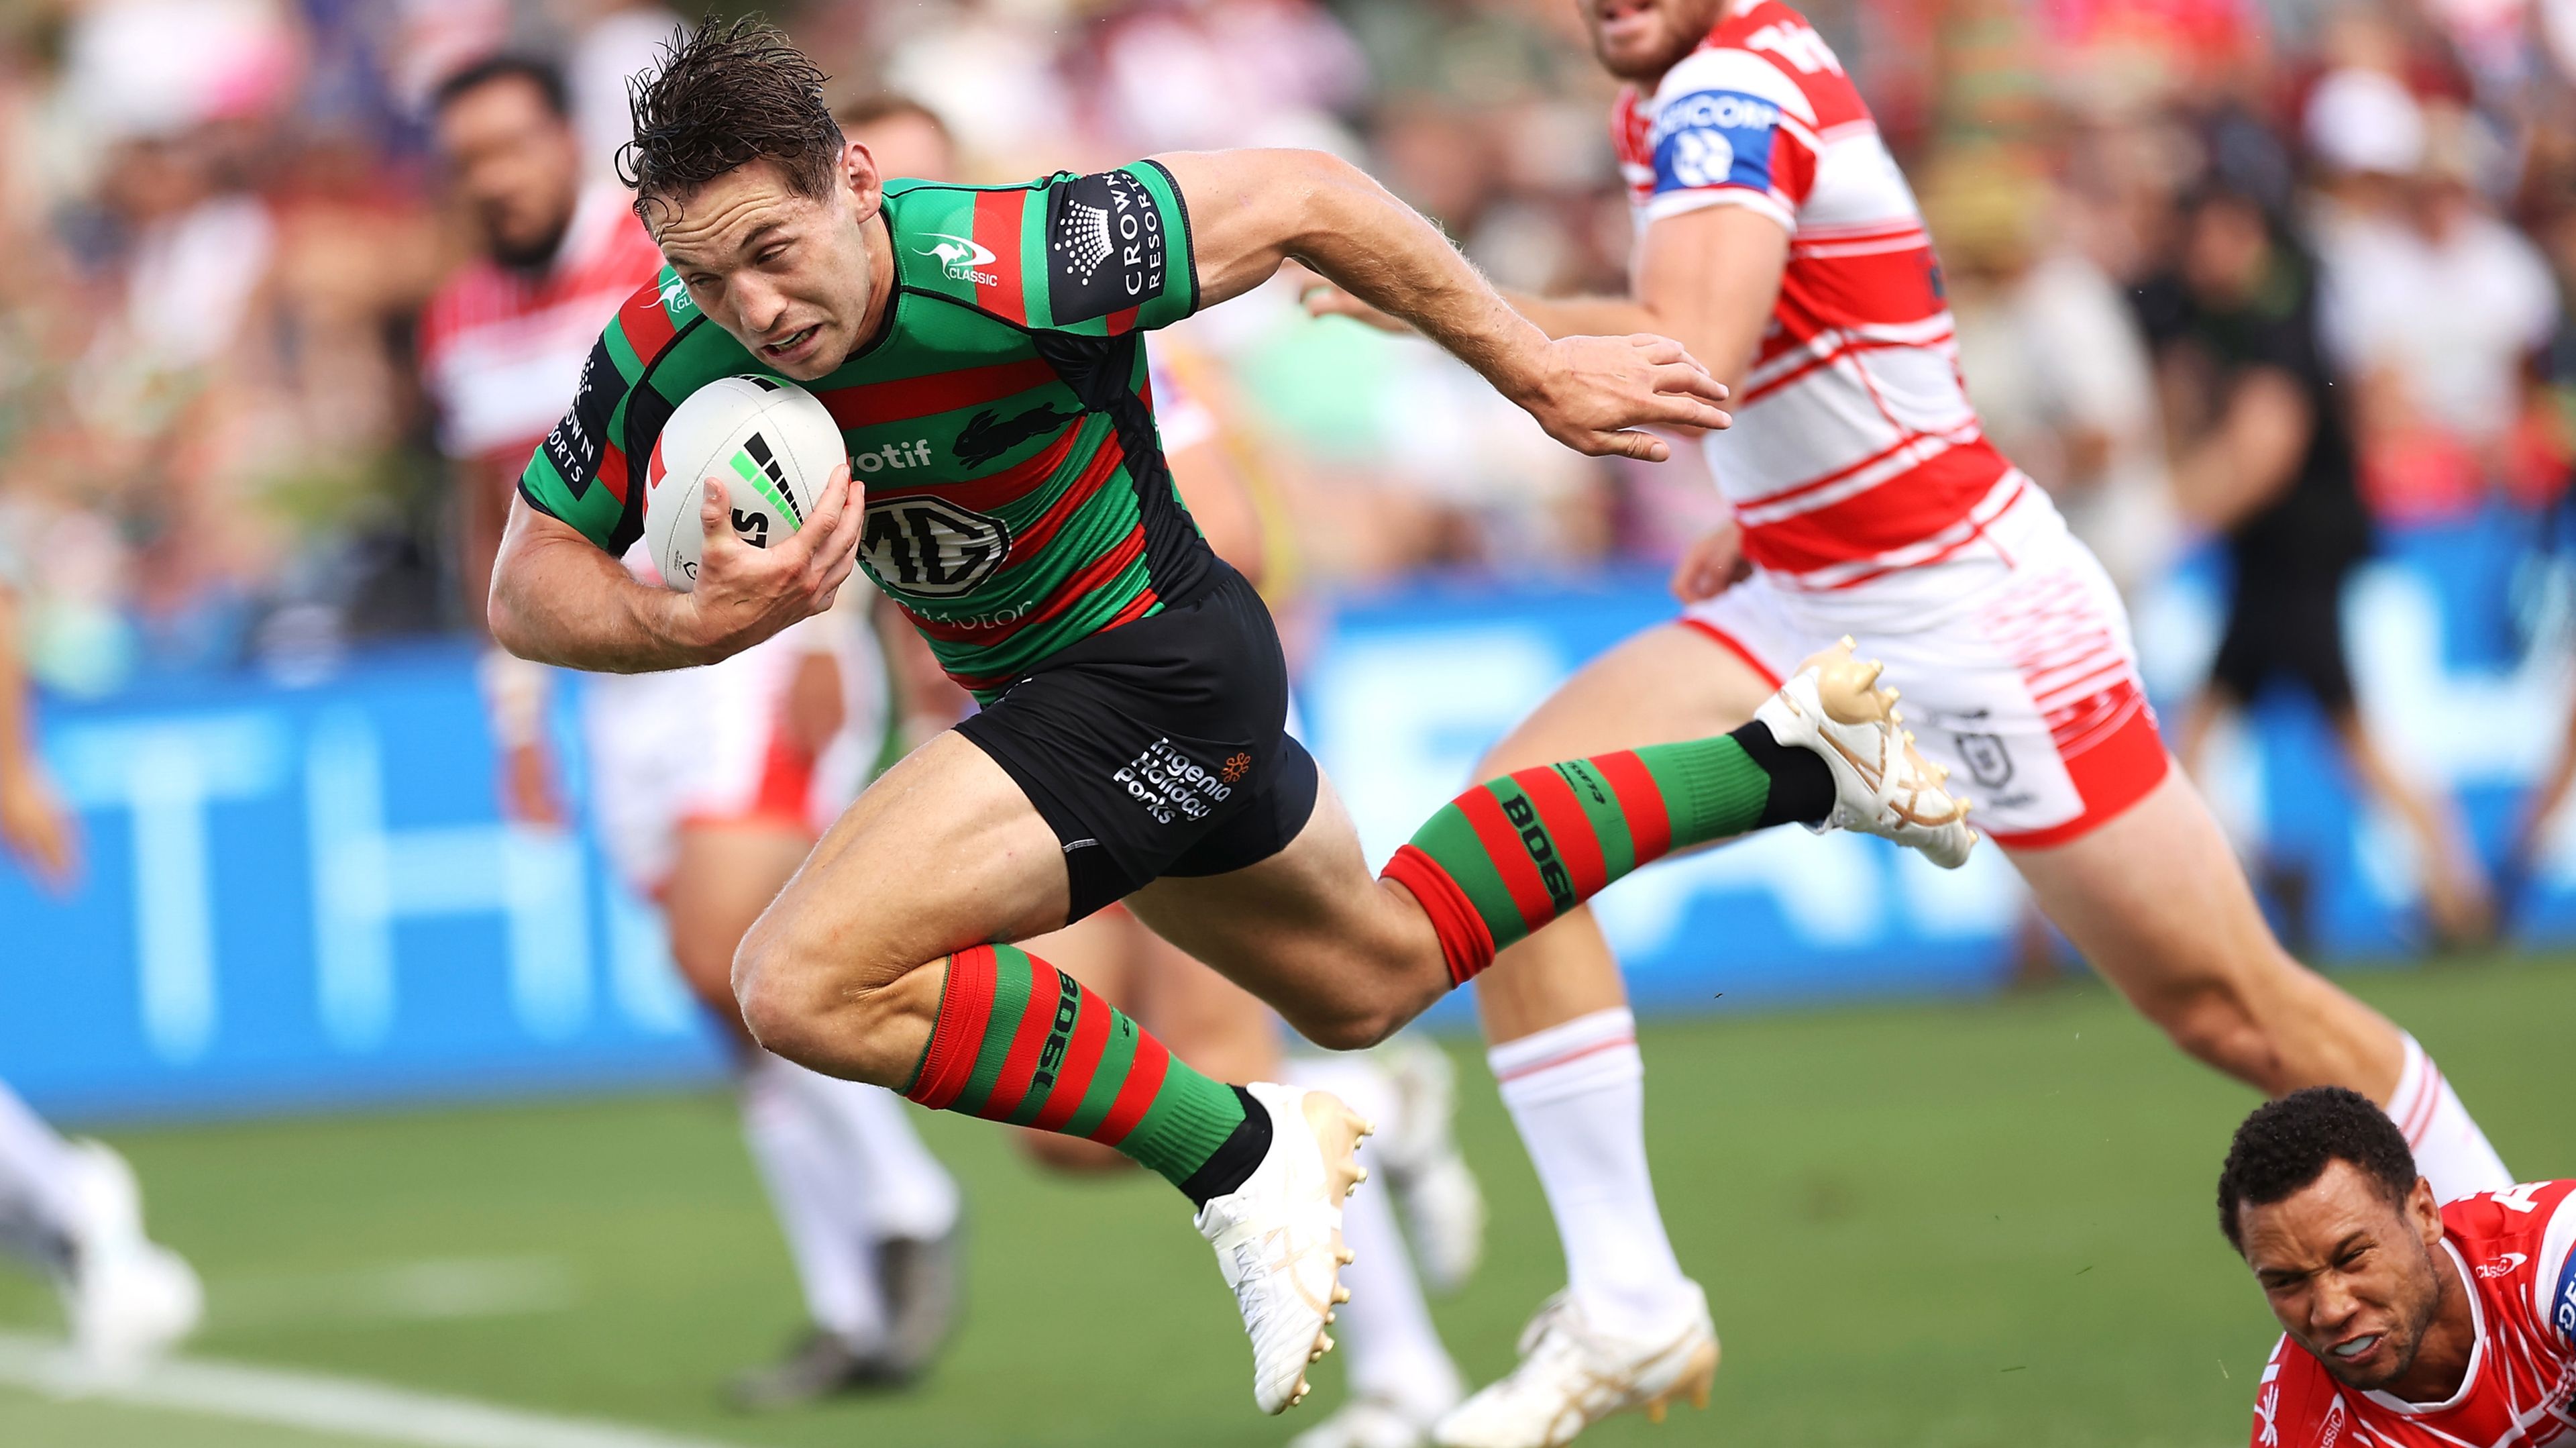 MUDGEE, AUSTRALIA - FEBRUARY 18: Cameron Murray of the Rabbitohs break a tackle during the NRL Trial and Charity Shield match between St George Illawarra Dragons and South Sydney Rabbitohs at Glen Willow Sporting Complex on February 18, 2023 in Mudgee, Australia. (Photo by Mark Kolbe/Getty Images)